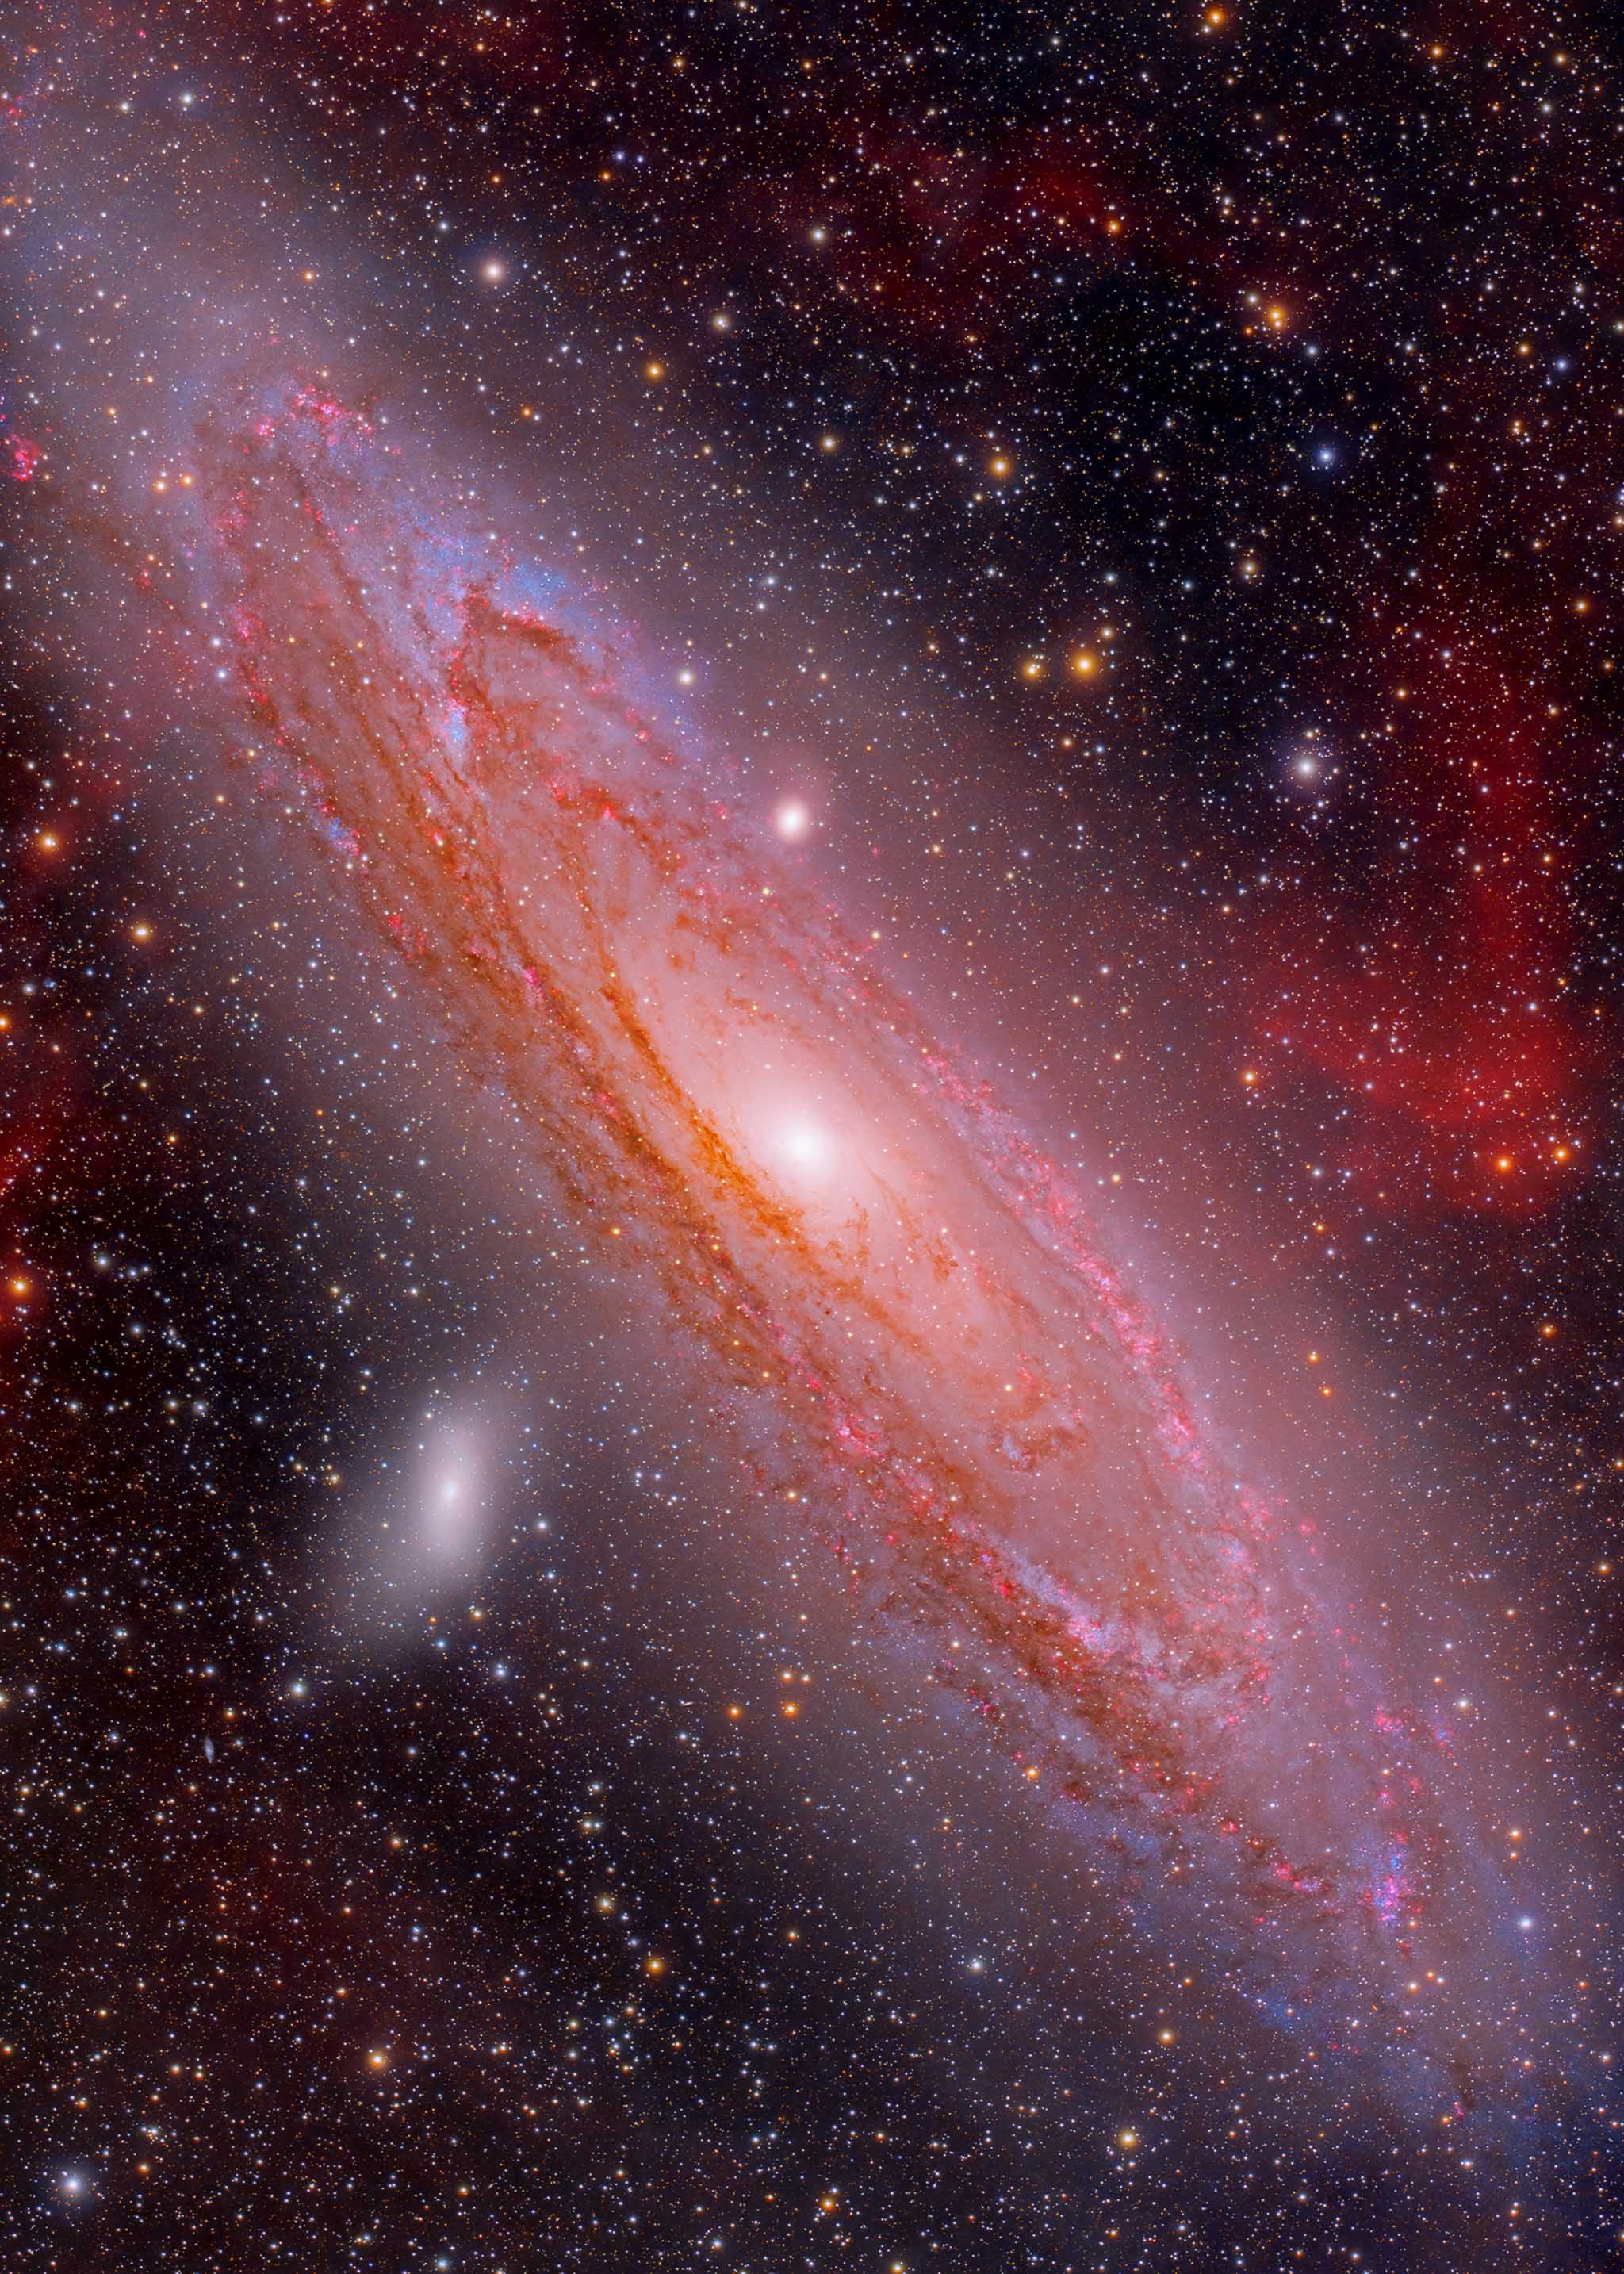 Andromeda Galaxy in Hydrogen Clouds